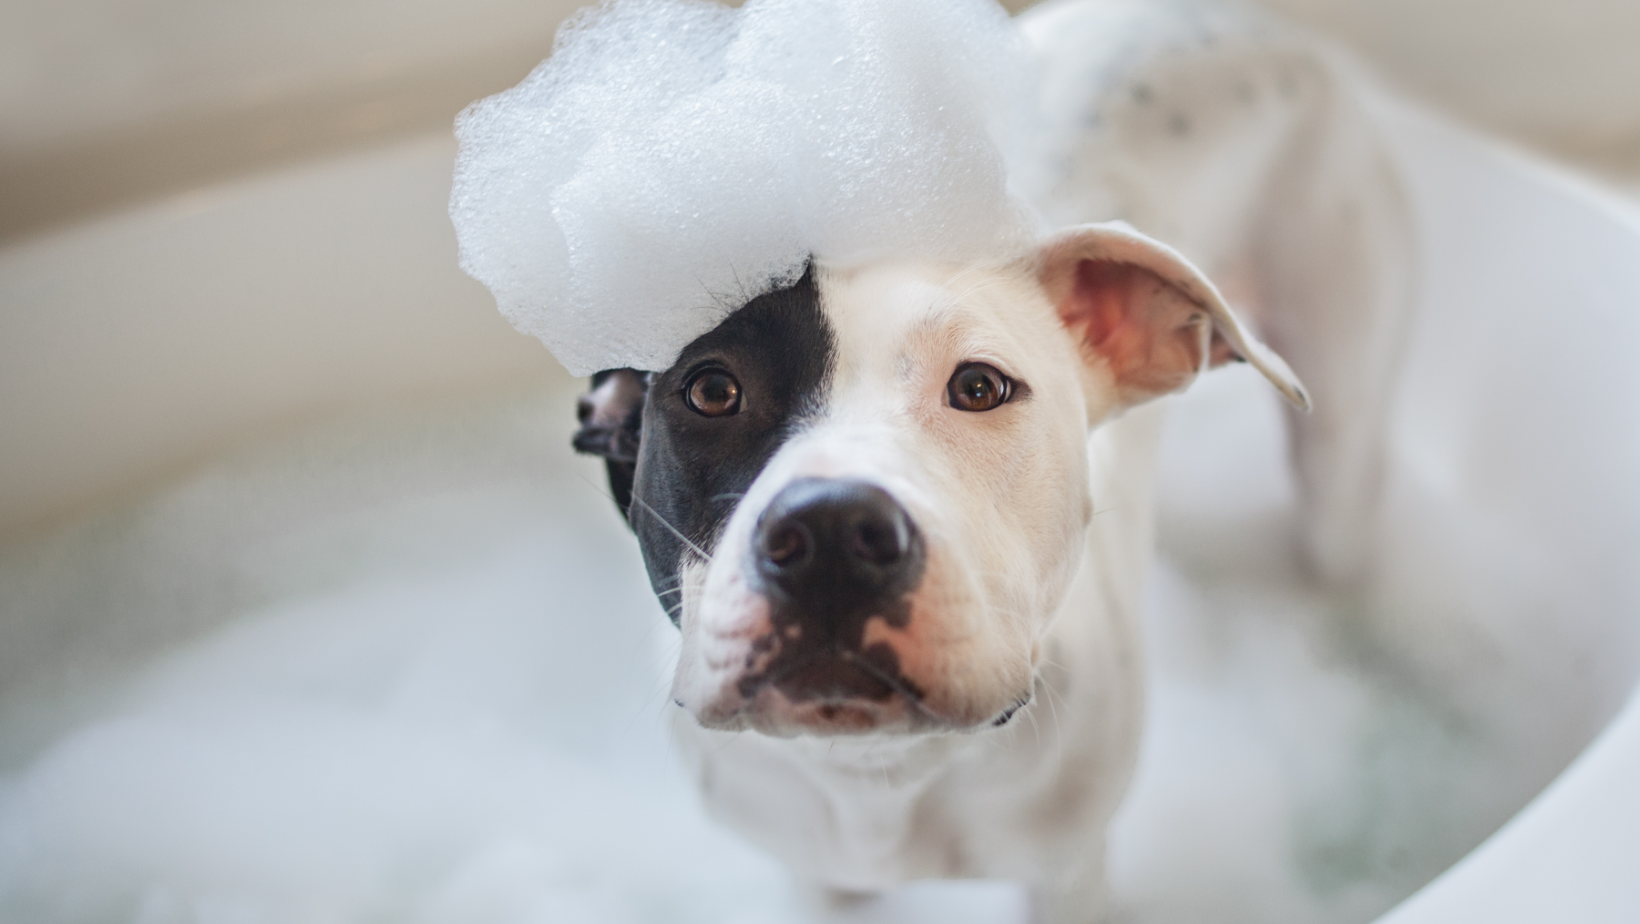 Bath and Bubbles-Best Personalised Mobile Pet Grooming Dubai